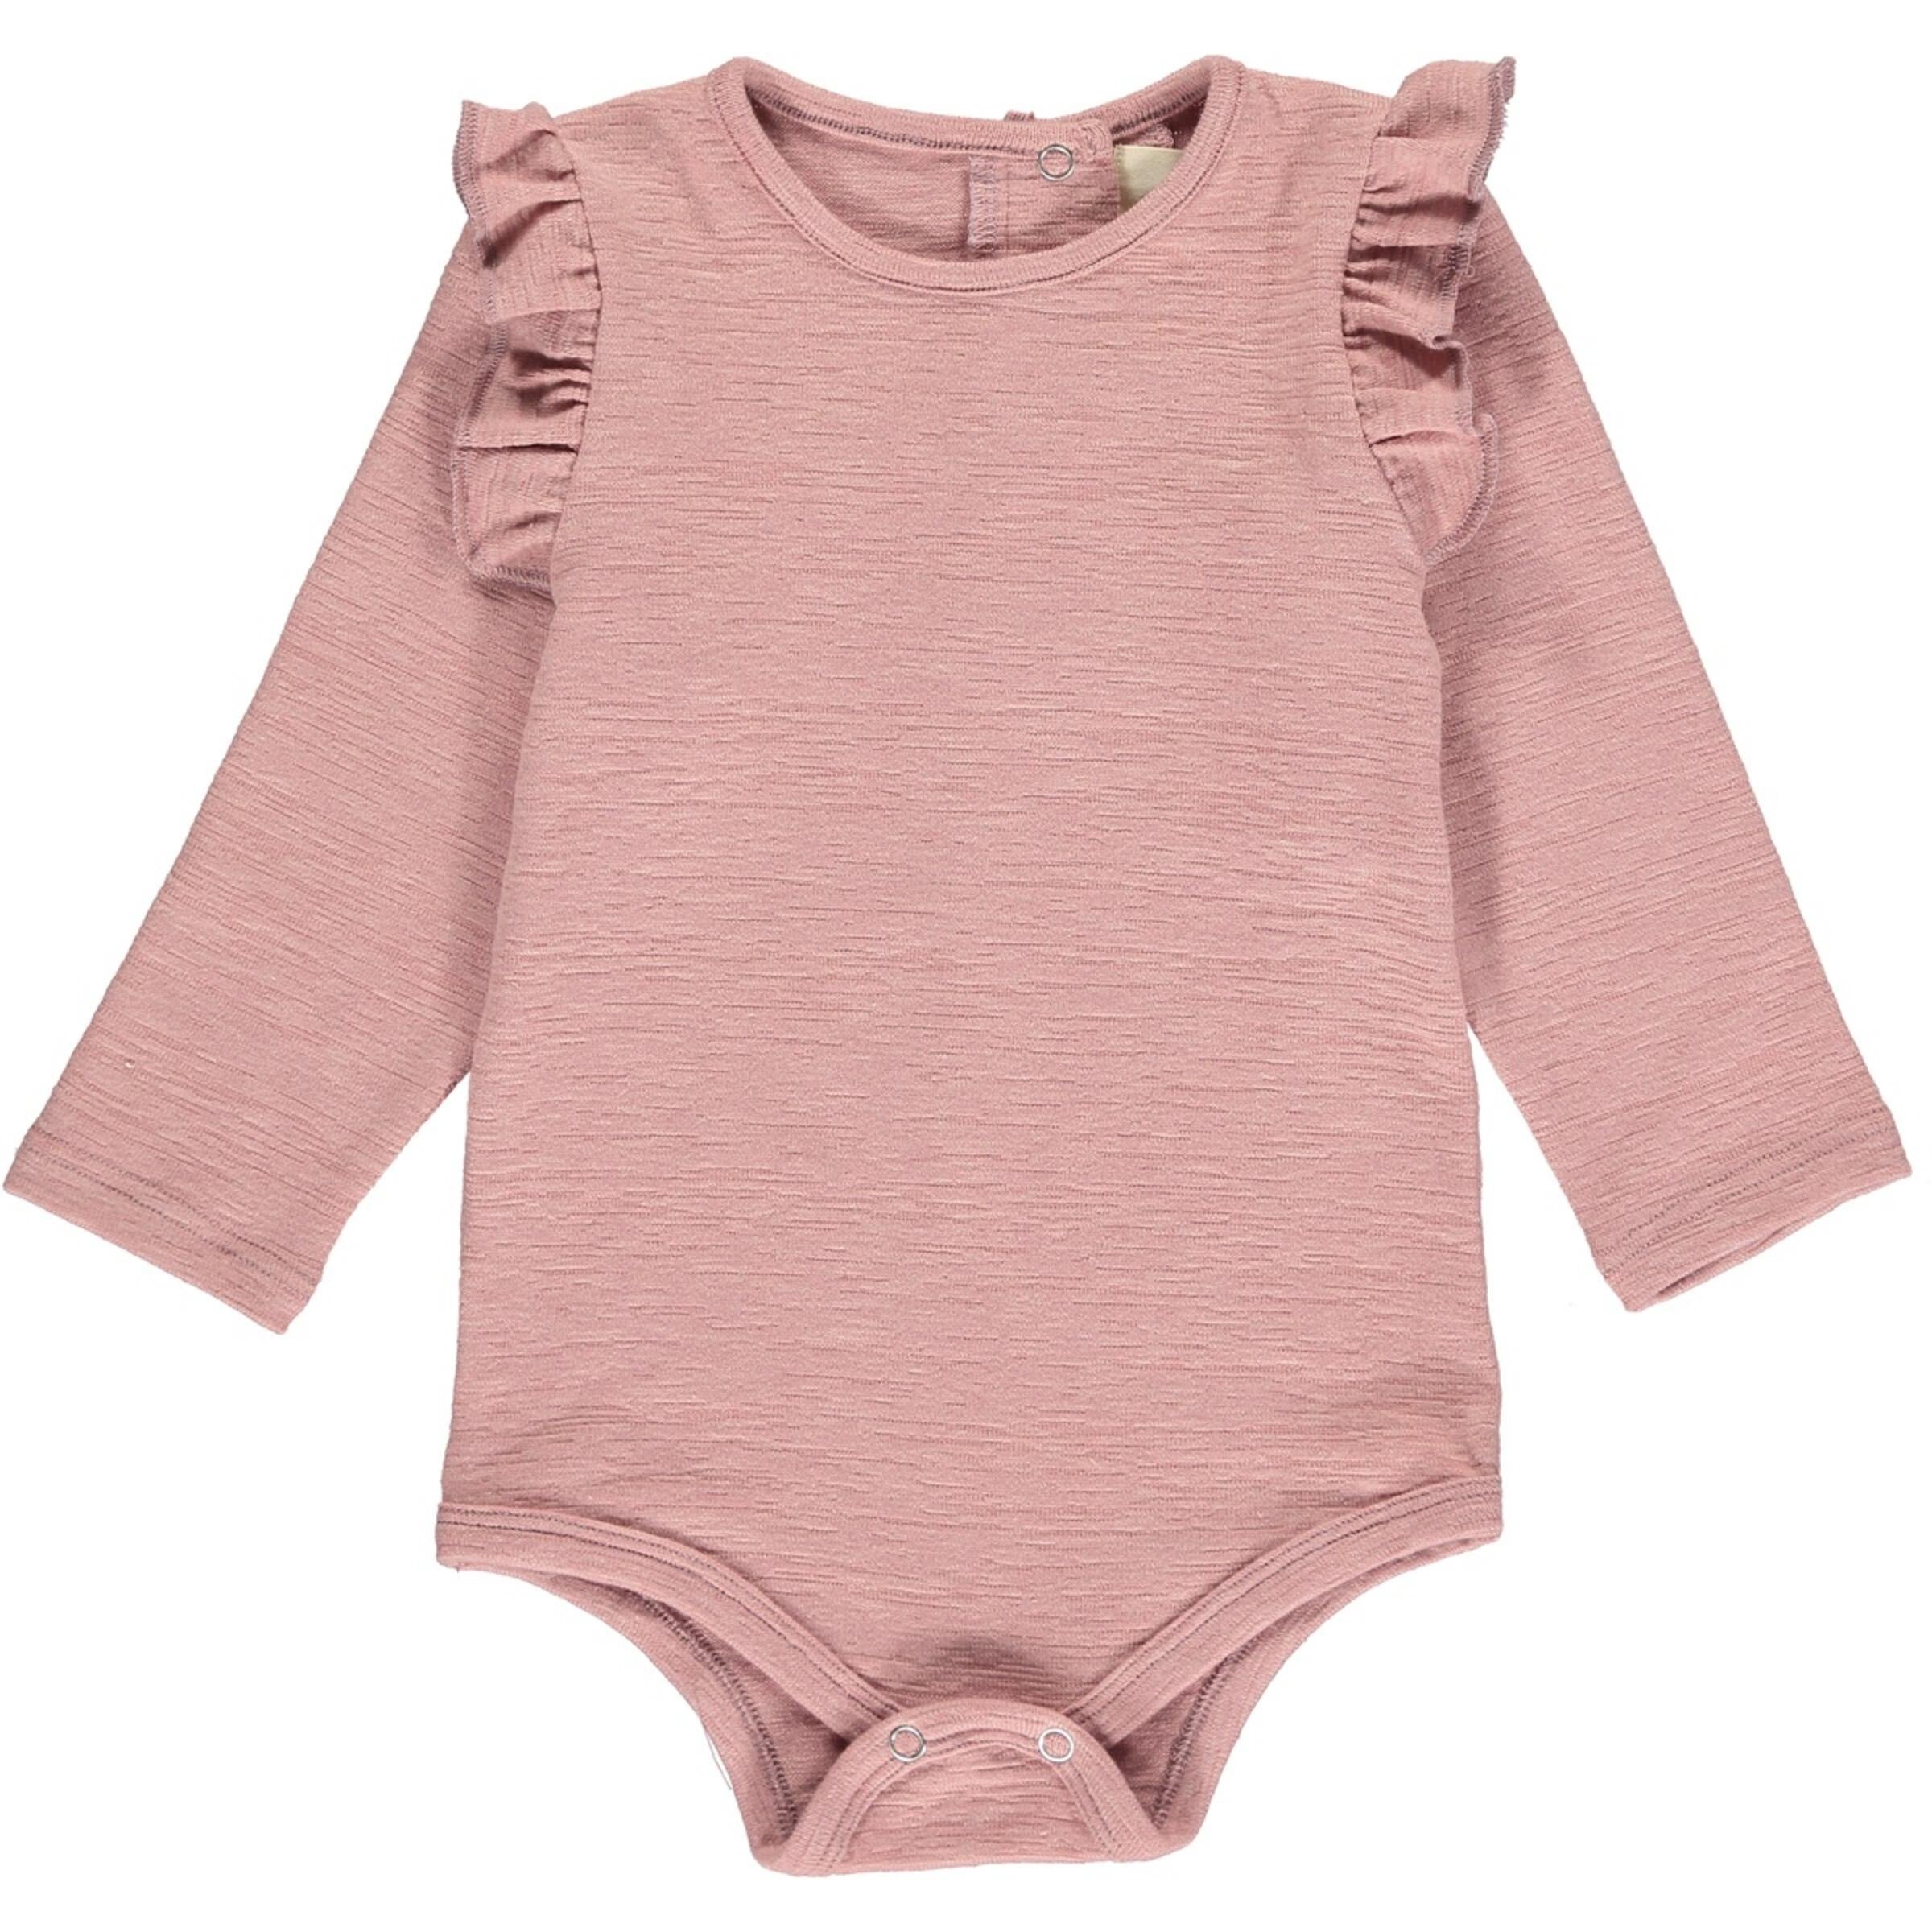 long sleeve rose colored onesie with ruffled sleeve